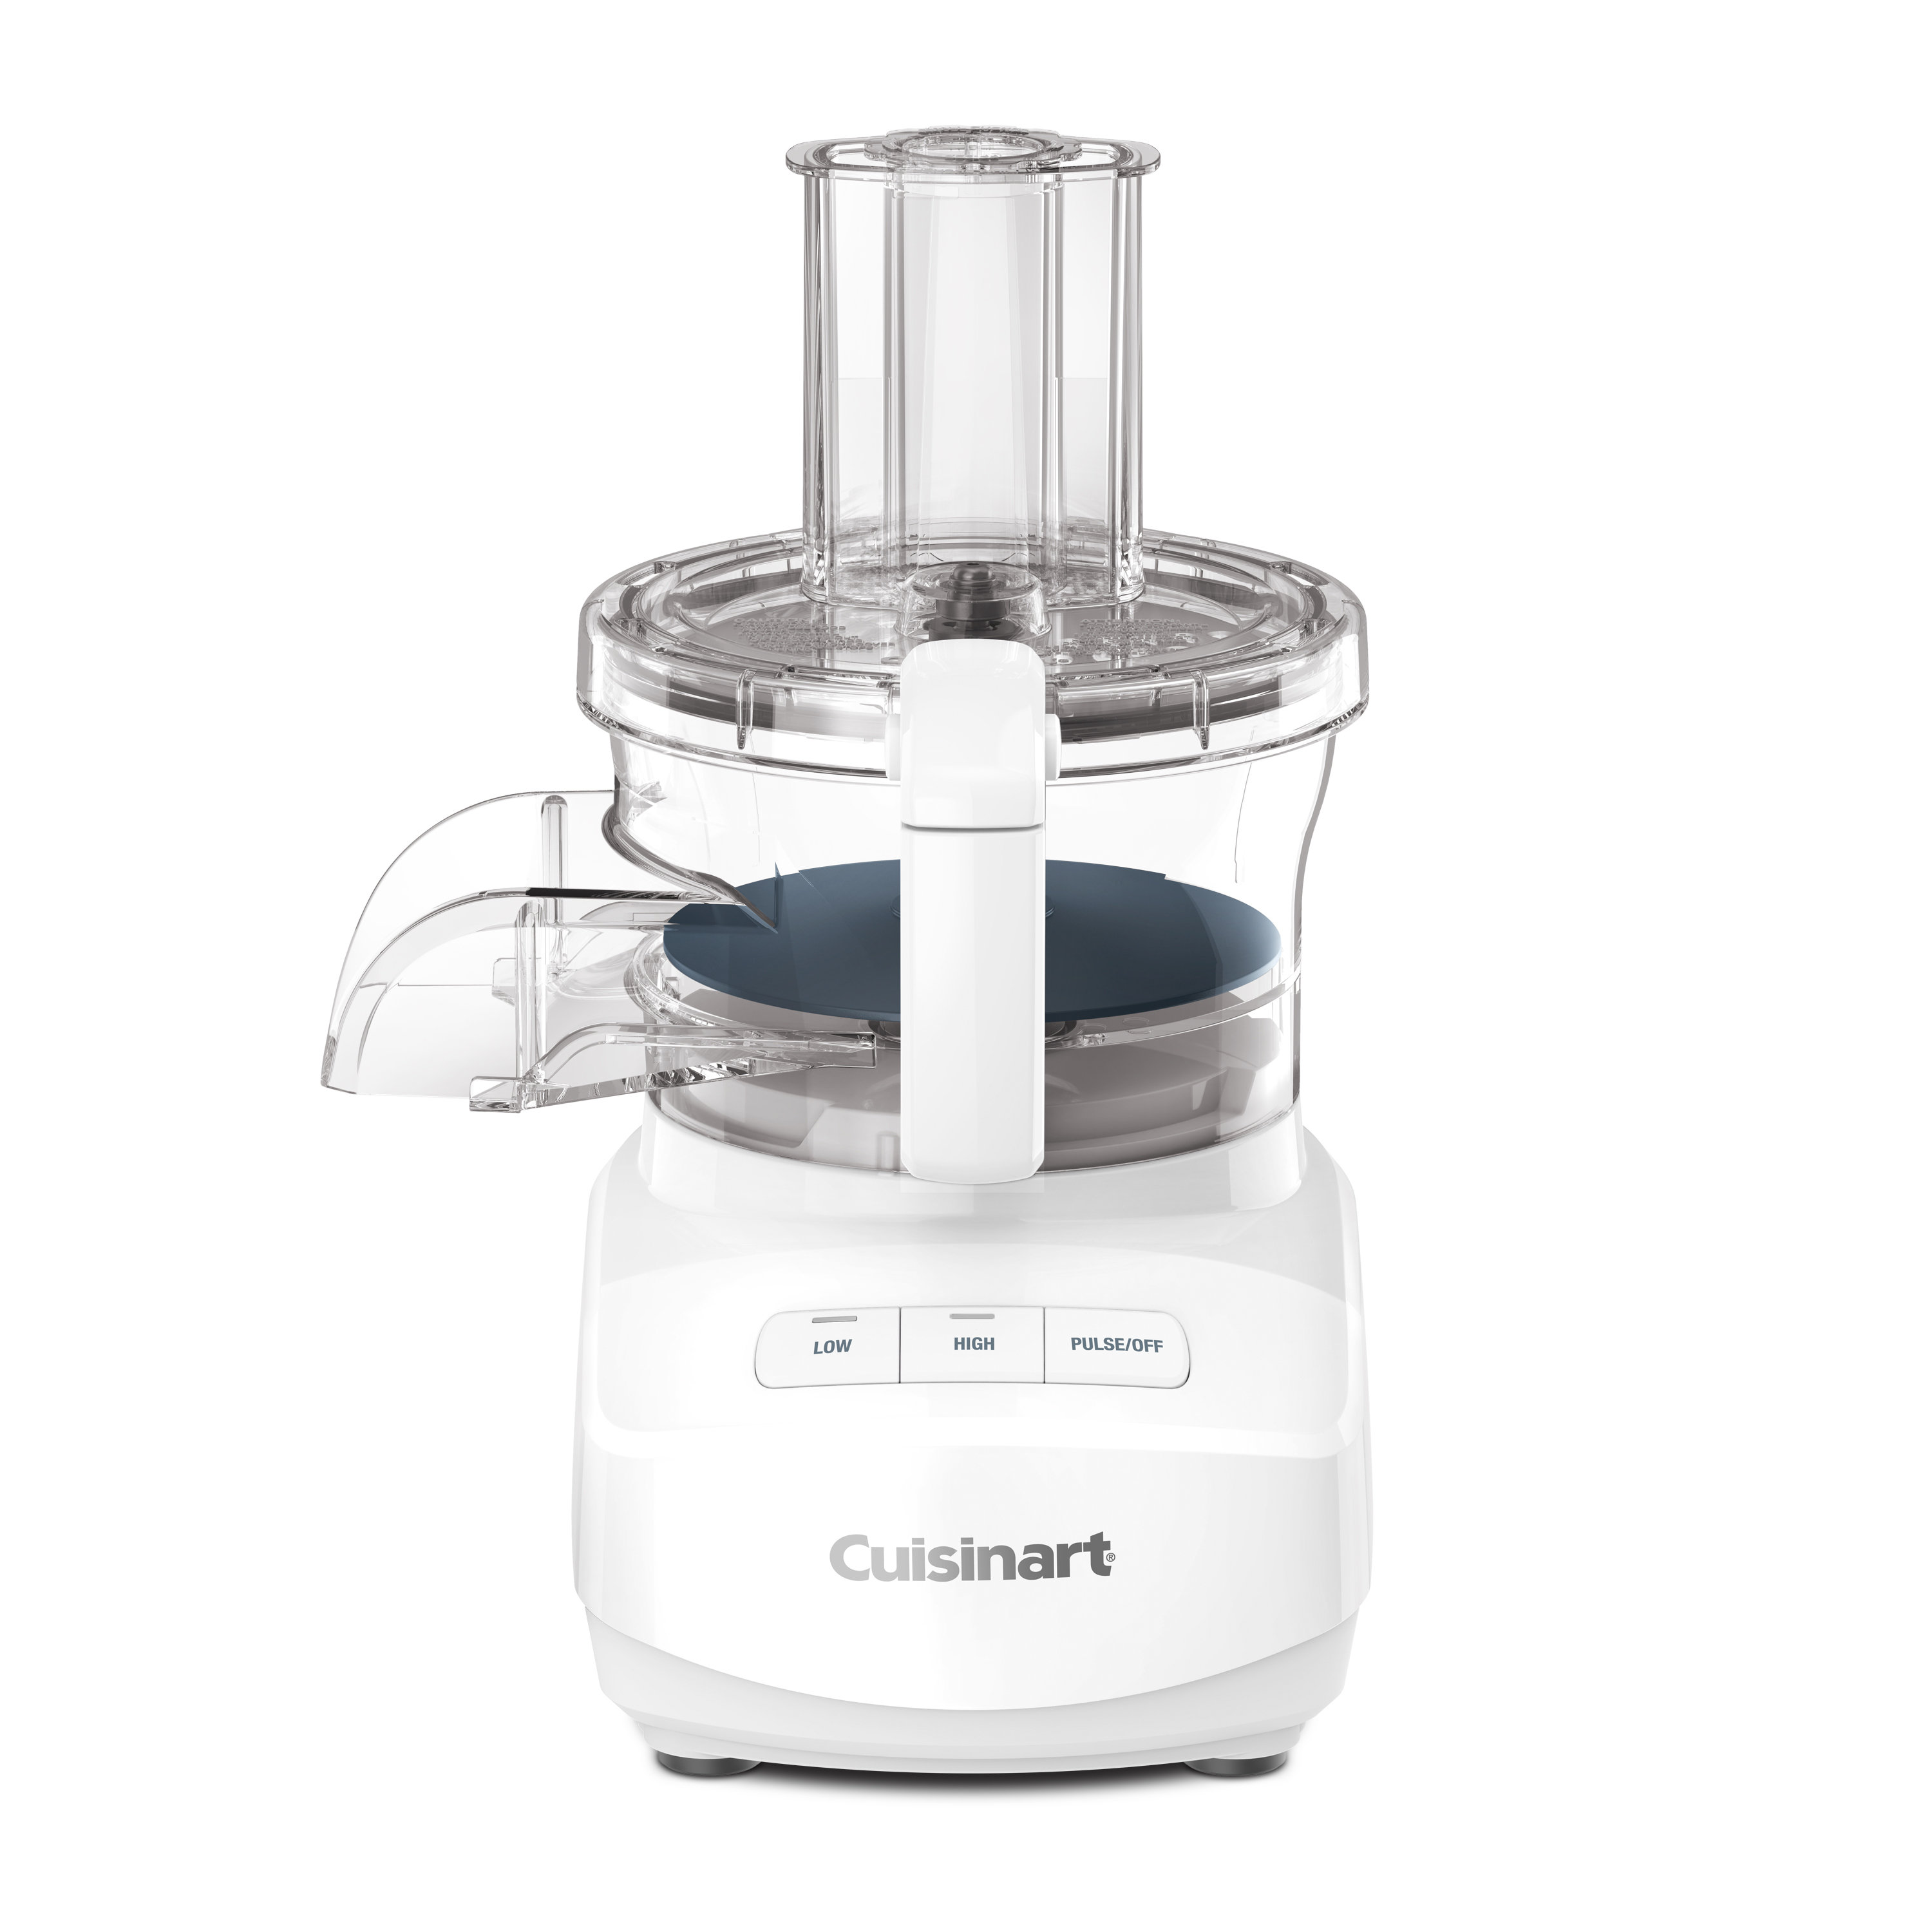  GE Food Processor, 12 Cup, Complete with 3 Feeding Tubes &  Stainless Steel Accessories-3 Discs + Dough Blade, 3 Speed, for Shredded  Cheese, Chicken & More, Kitchen Essentials